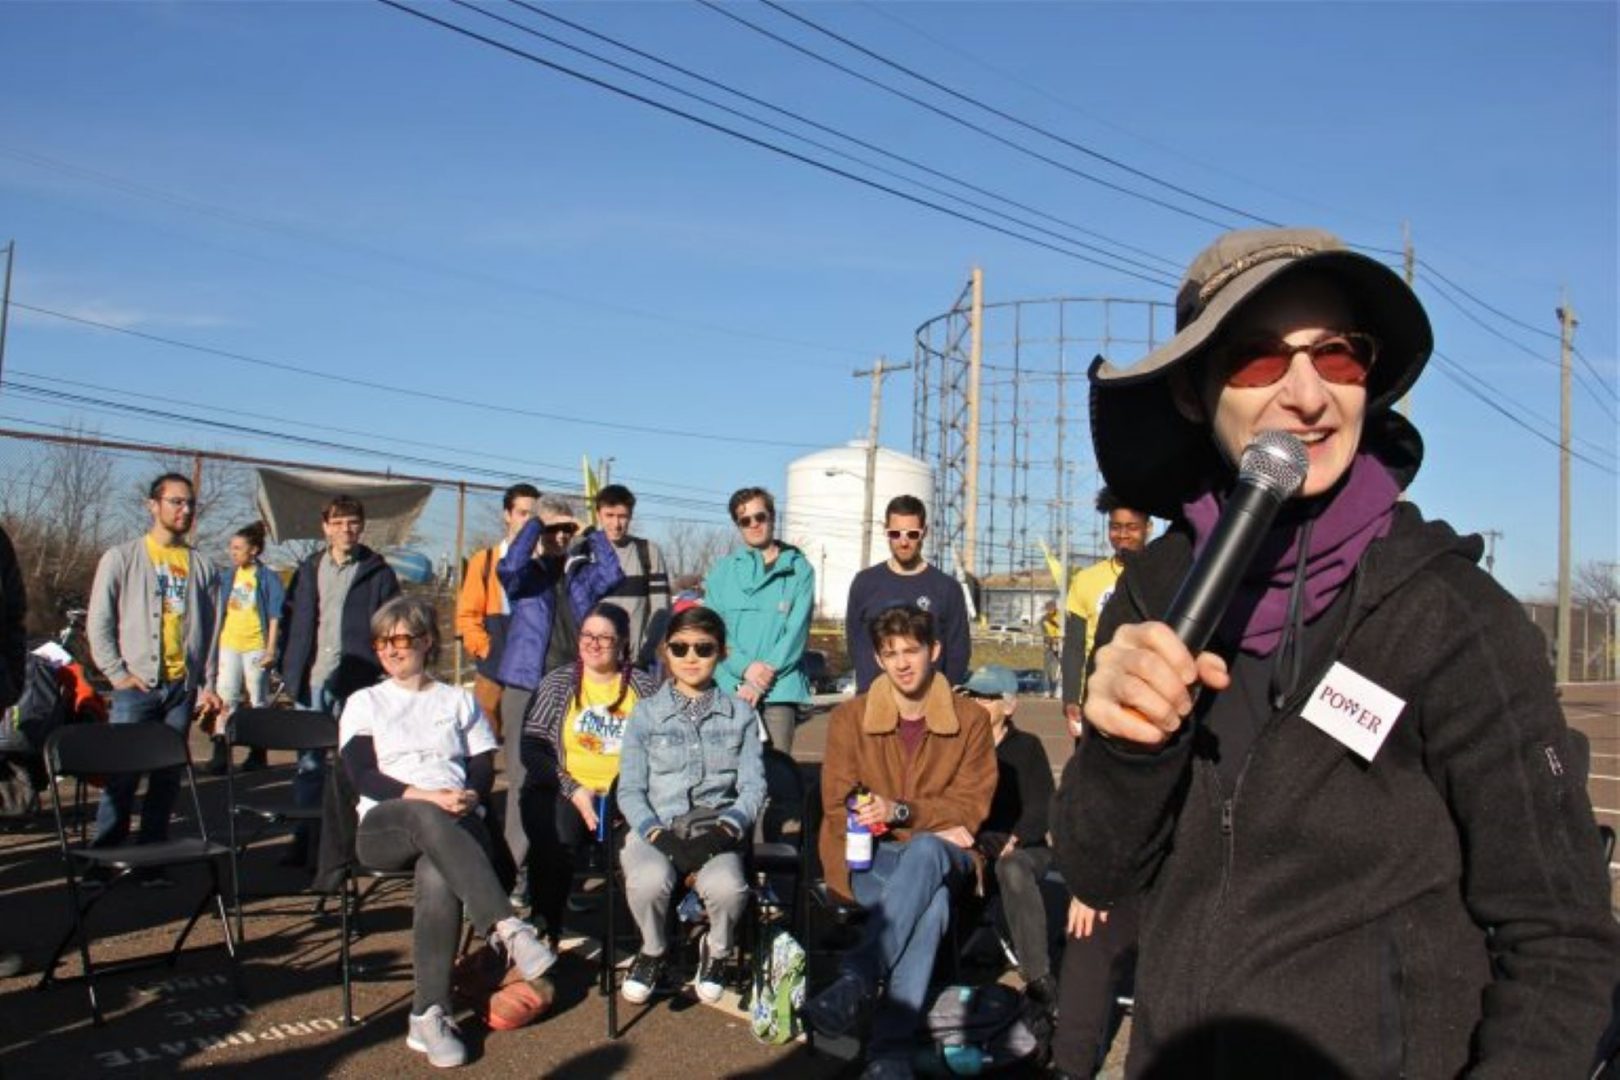 Rabbi Julie Greenberg rallies protesters during a daylong action at PES refinery in South Philadelphia. 